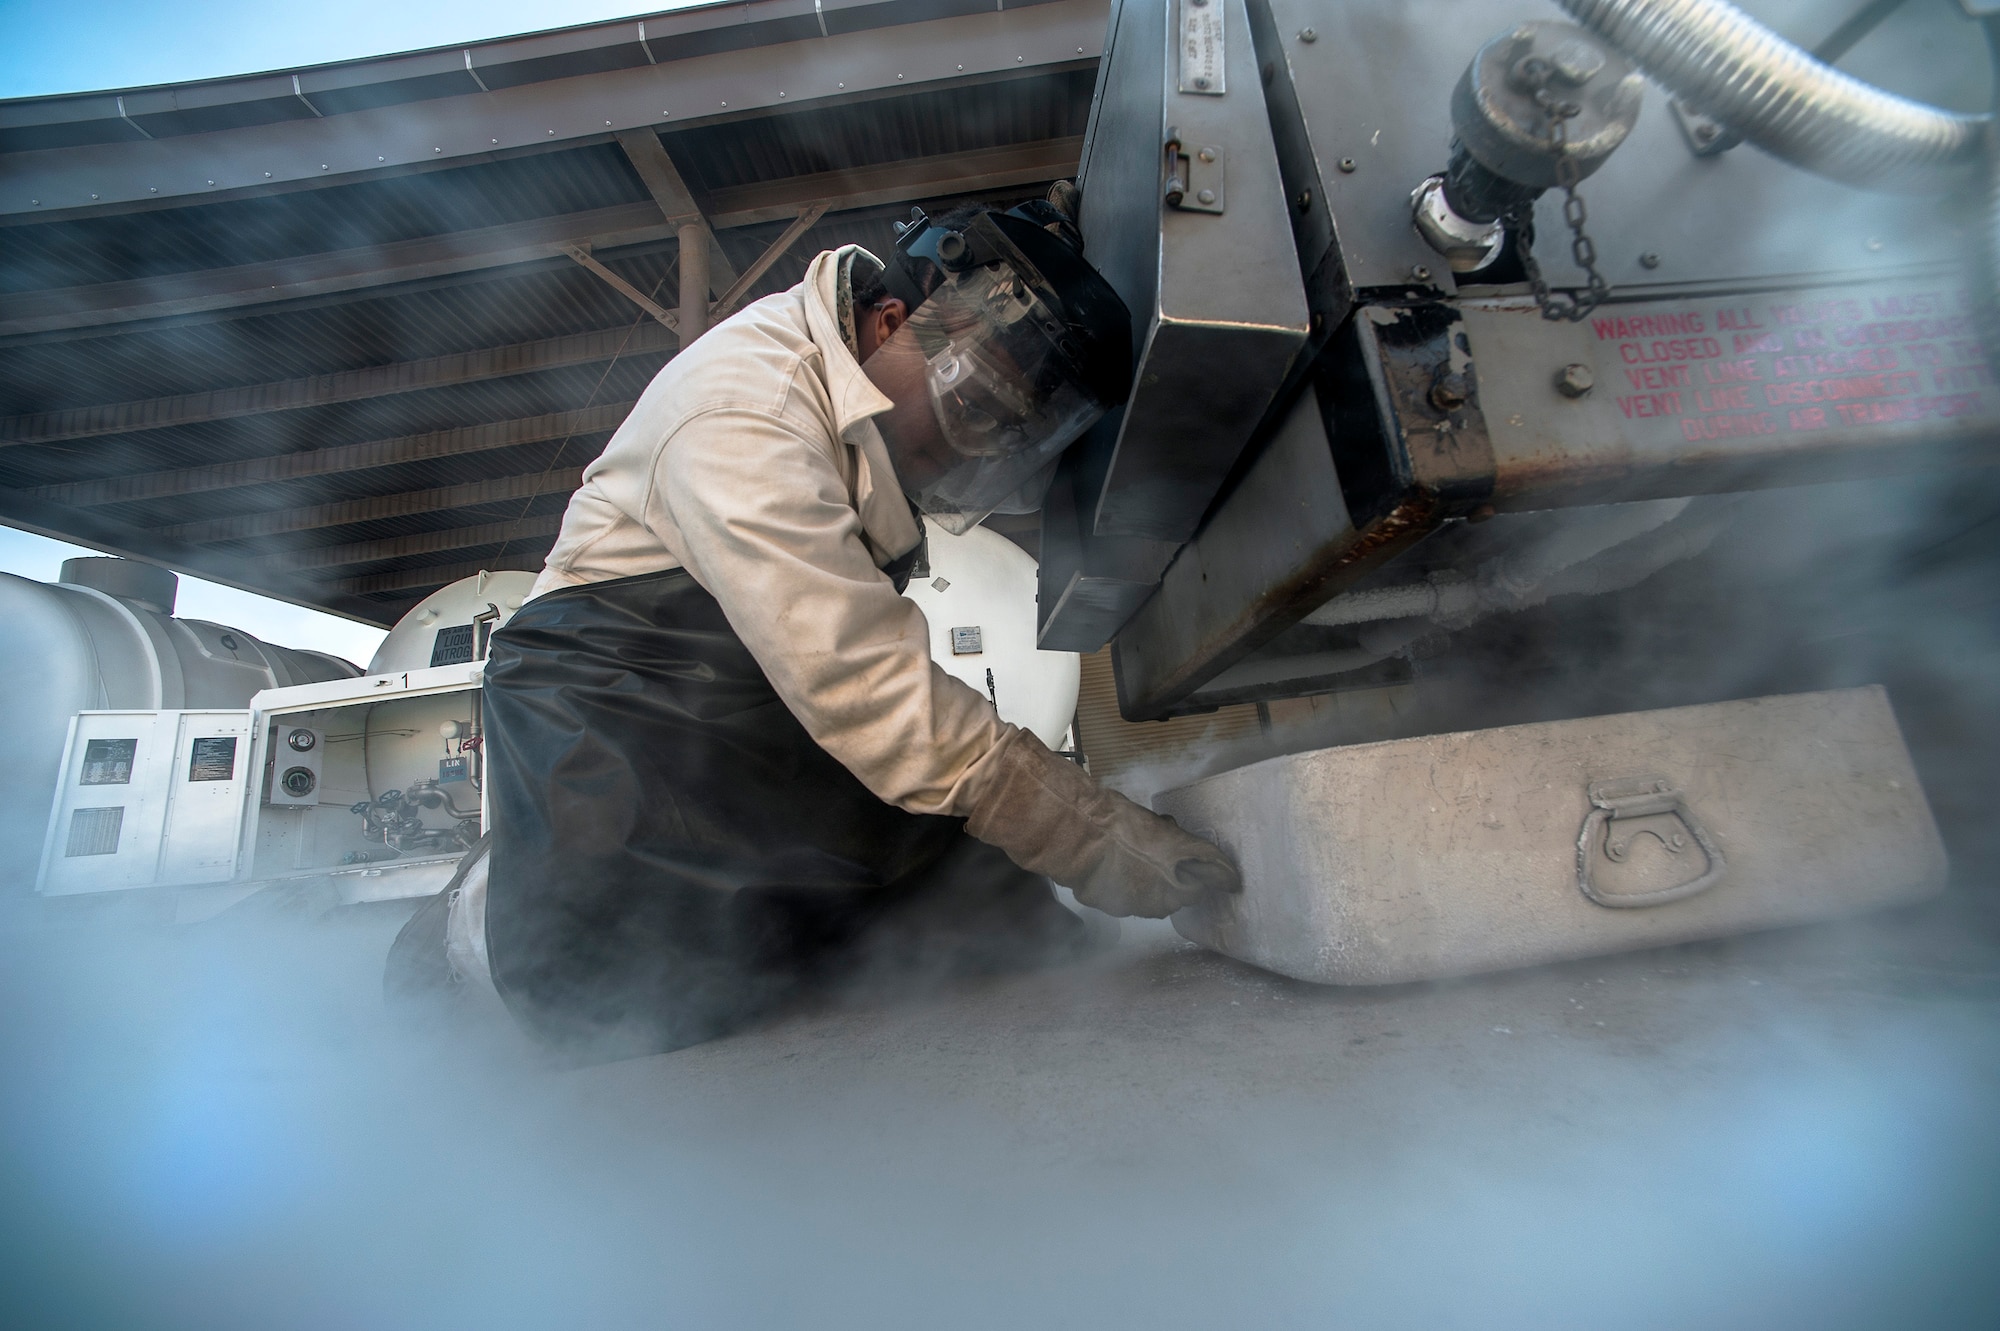 Senior Airman Jennifer Cook, 8th Maintenance Squadron aircraft electrical and environmental journeyman, drains a liquid oxygen cart at Kunsan Air Base, Republic of Korea, Oct. 29, 2015. The electrical and environmental section consists of 15 Airmen who are responsible for the repair and maintenance of 39 aircraft parts valued at $256K, including aircraft batteries and liquid oxygen converters. (U.S. Air Force photo by Staff Sgt. Nick Wilson/Released)